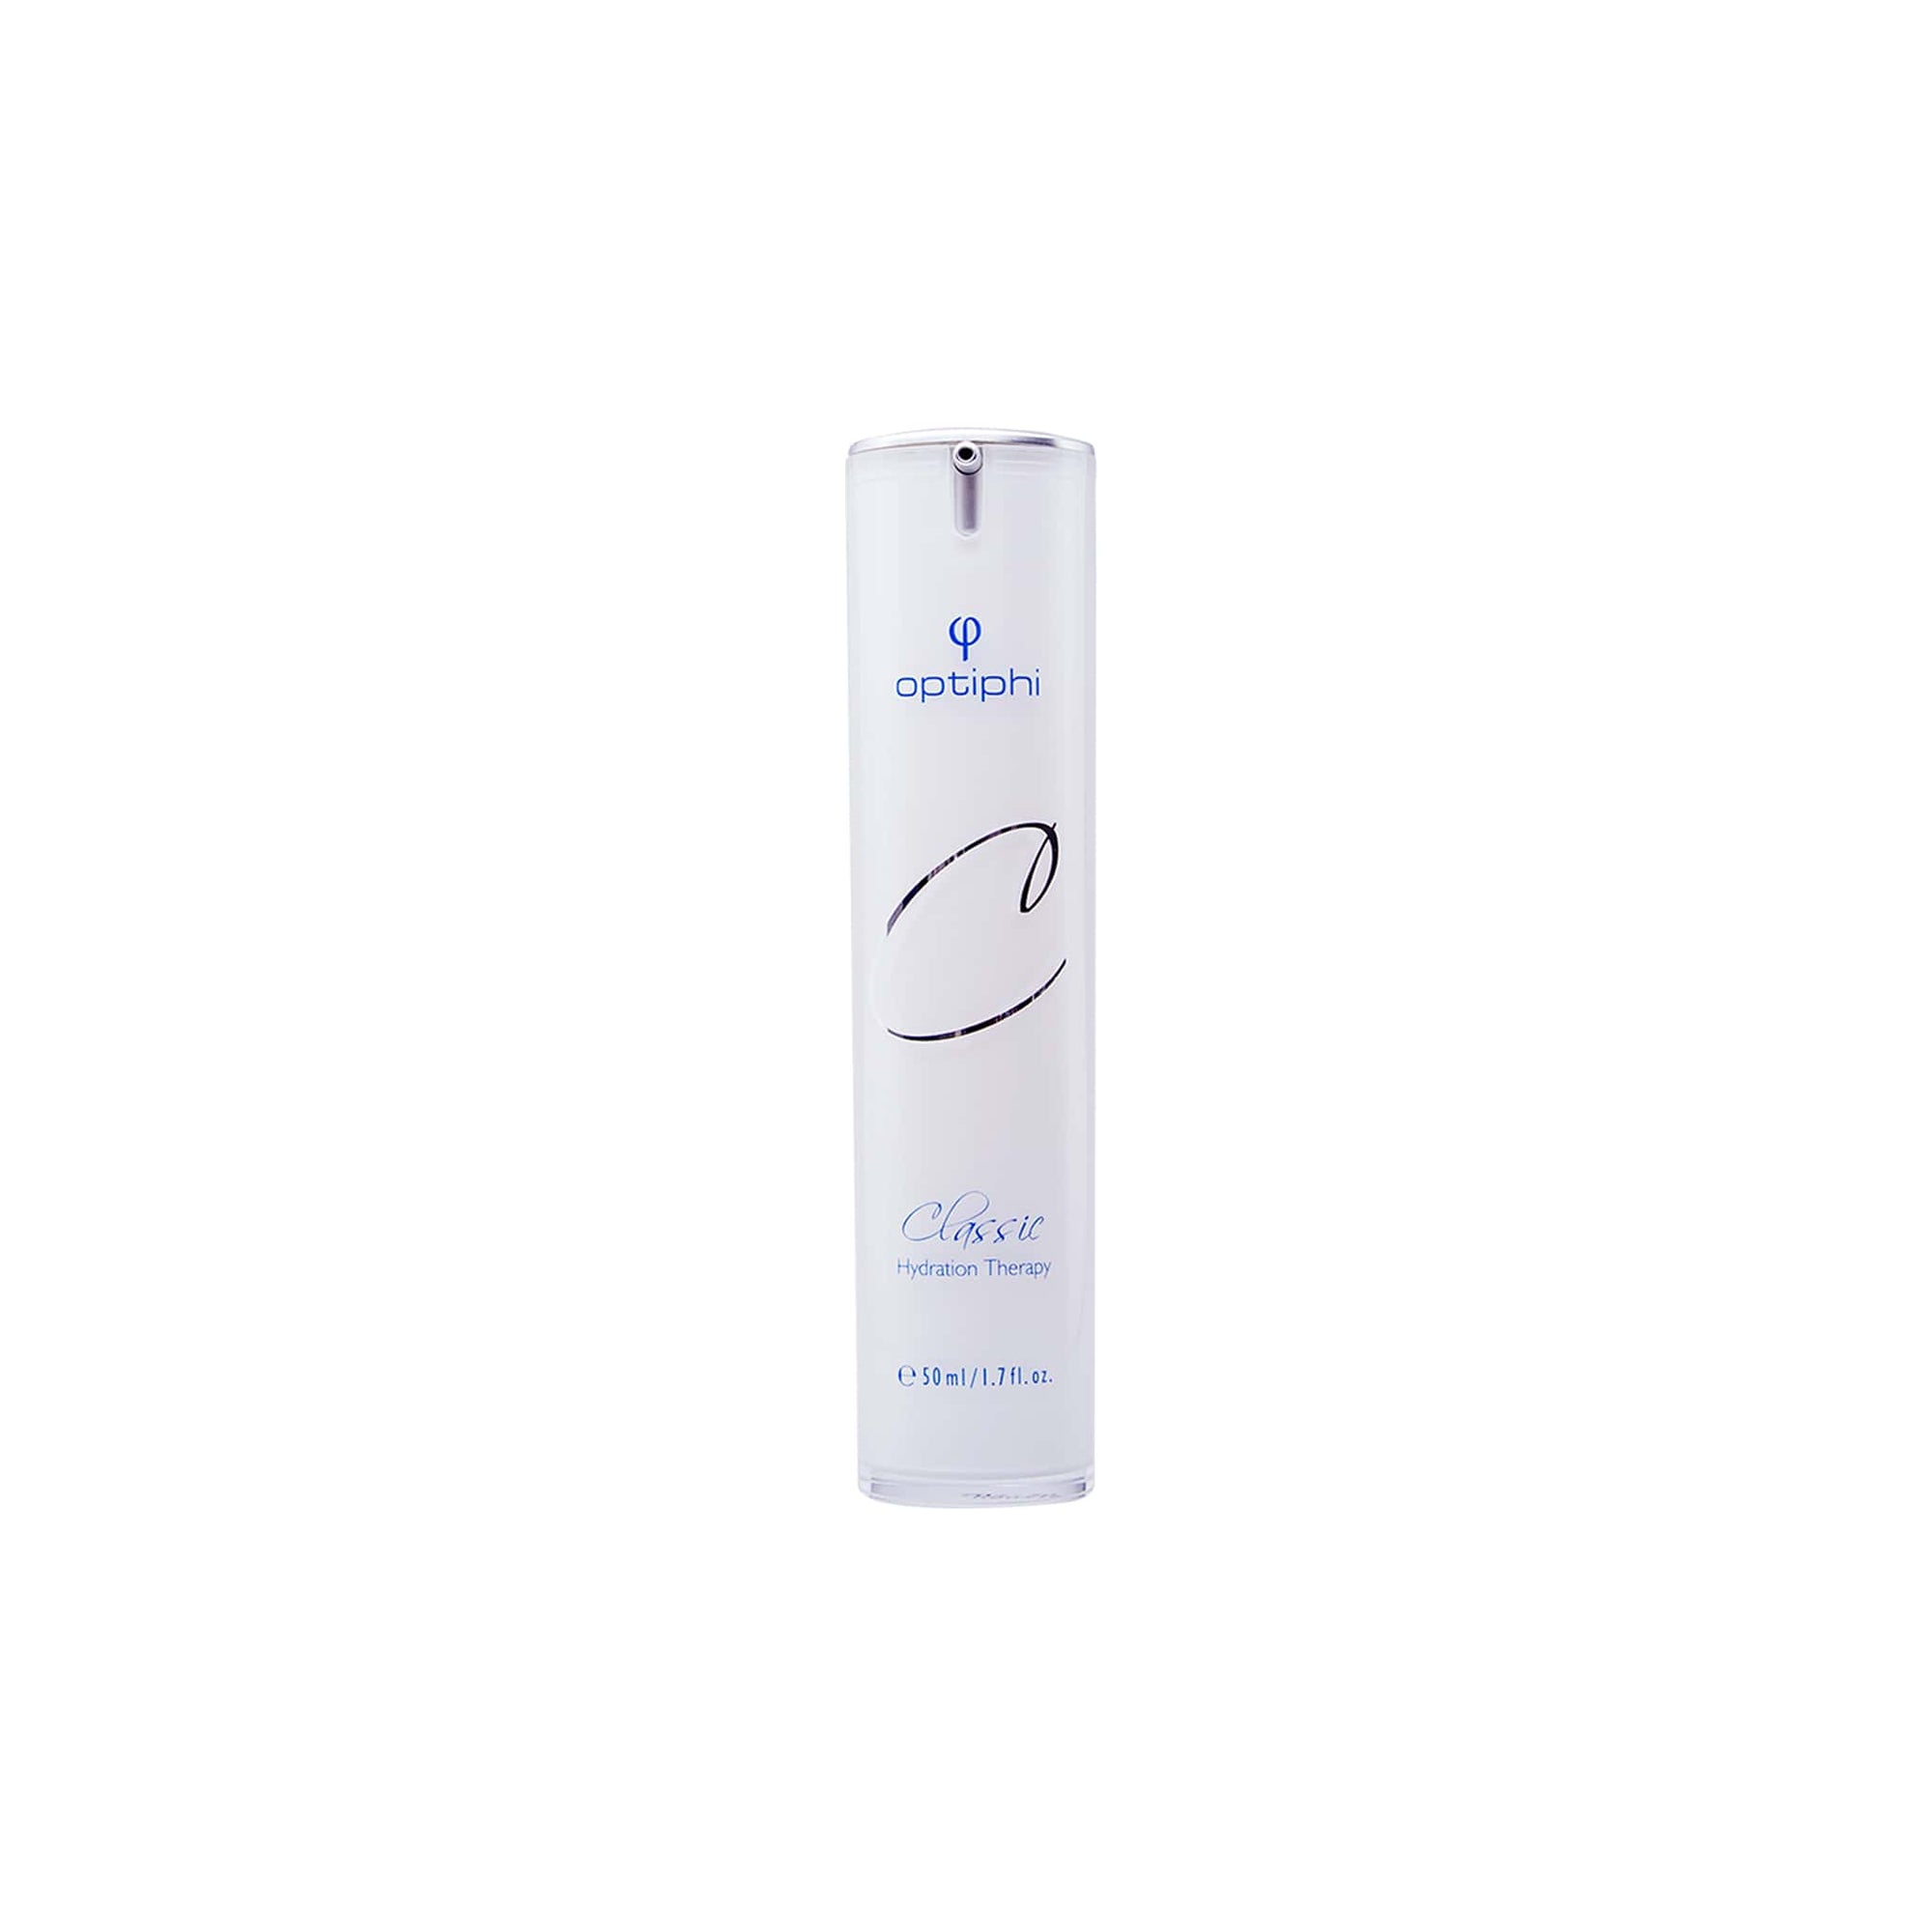 Optiphi Hydration Therapy 50ml